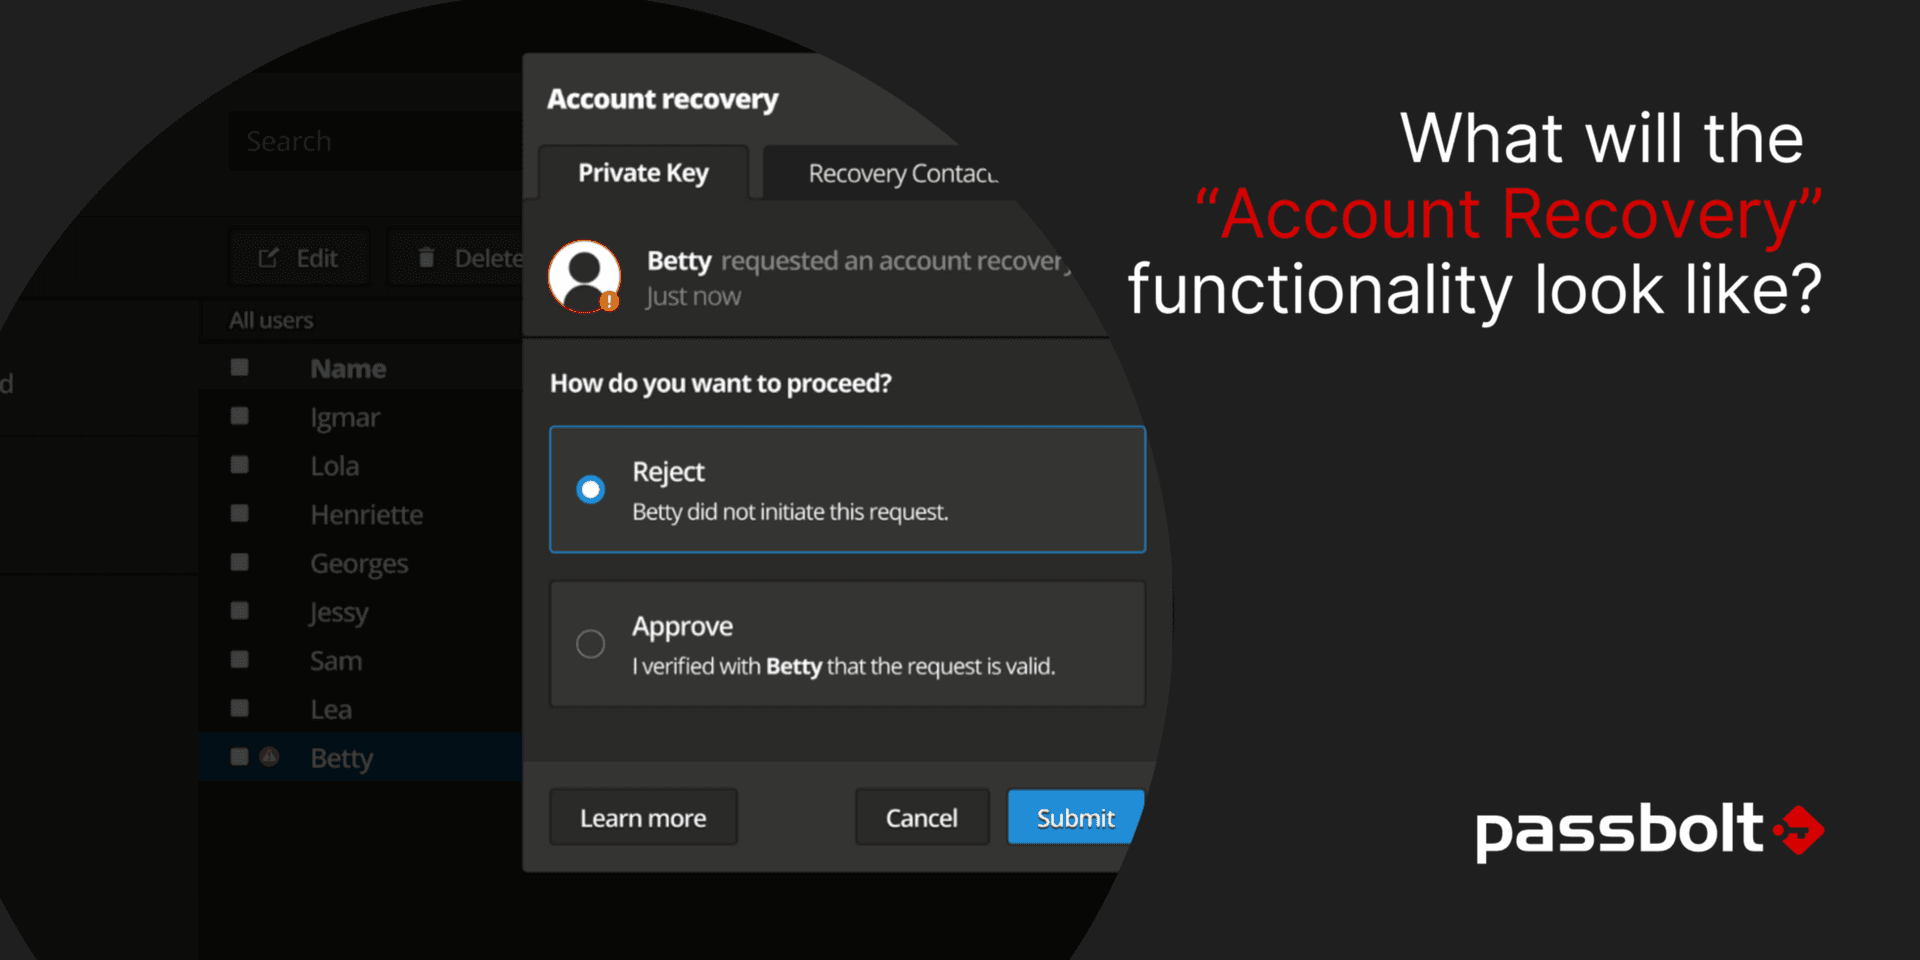 What will the “Account Recovery” functionality look like?